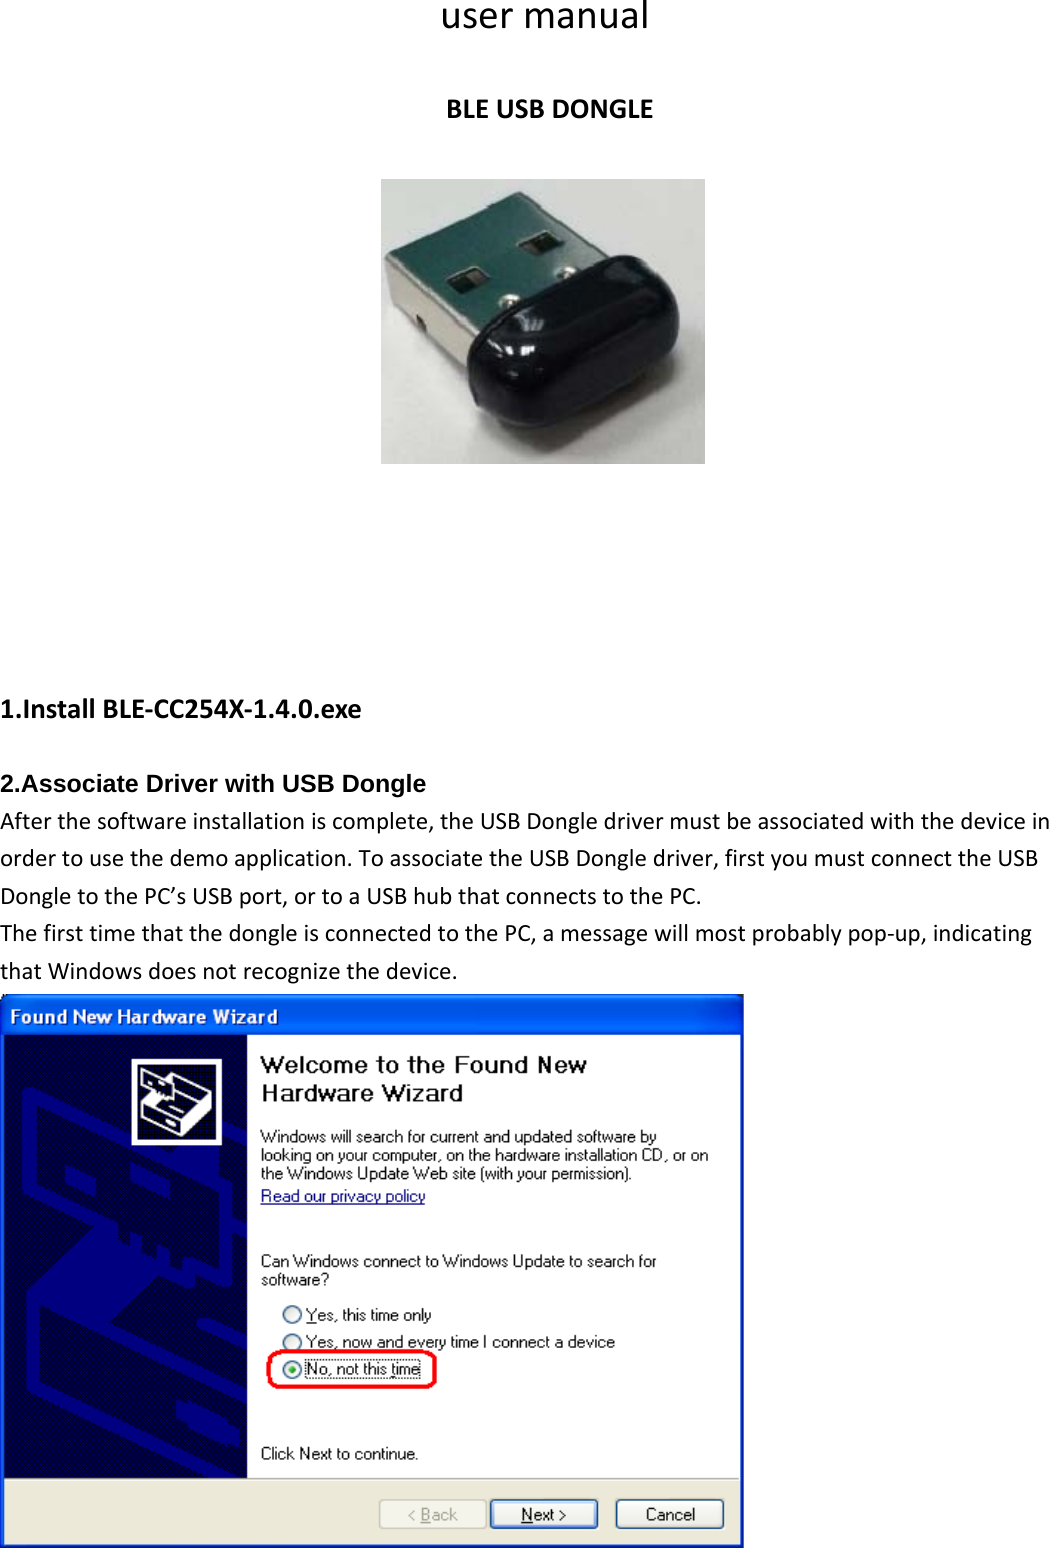 usermanualBLEUSBDONGLE1.InstallBLE‐CC254X‐1.4.0.exe2.Associate Driver with USB DongleAfterthesoftwareinstallationiscomplete,theUSBDongledrivermustbeassociatedwiththedeviceinordertousethedemoapplication.ToassociatetheUSBDongledriver,firstyoumustconnecttheUSBDongletothePC’sUSBport,ortoaUSBhubthatconnectstothePC.ThefirsttimethatthedongleisconnectedtothePC,amessagewillmostprobablypop‐up,indicatingthatWindowsdoesnotrecognizethedevice.